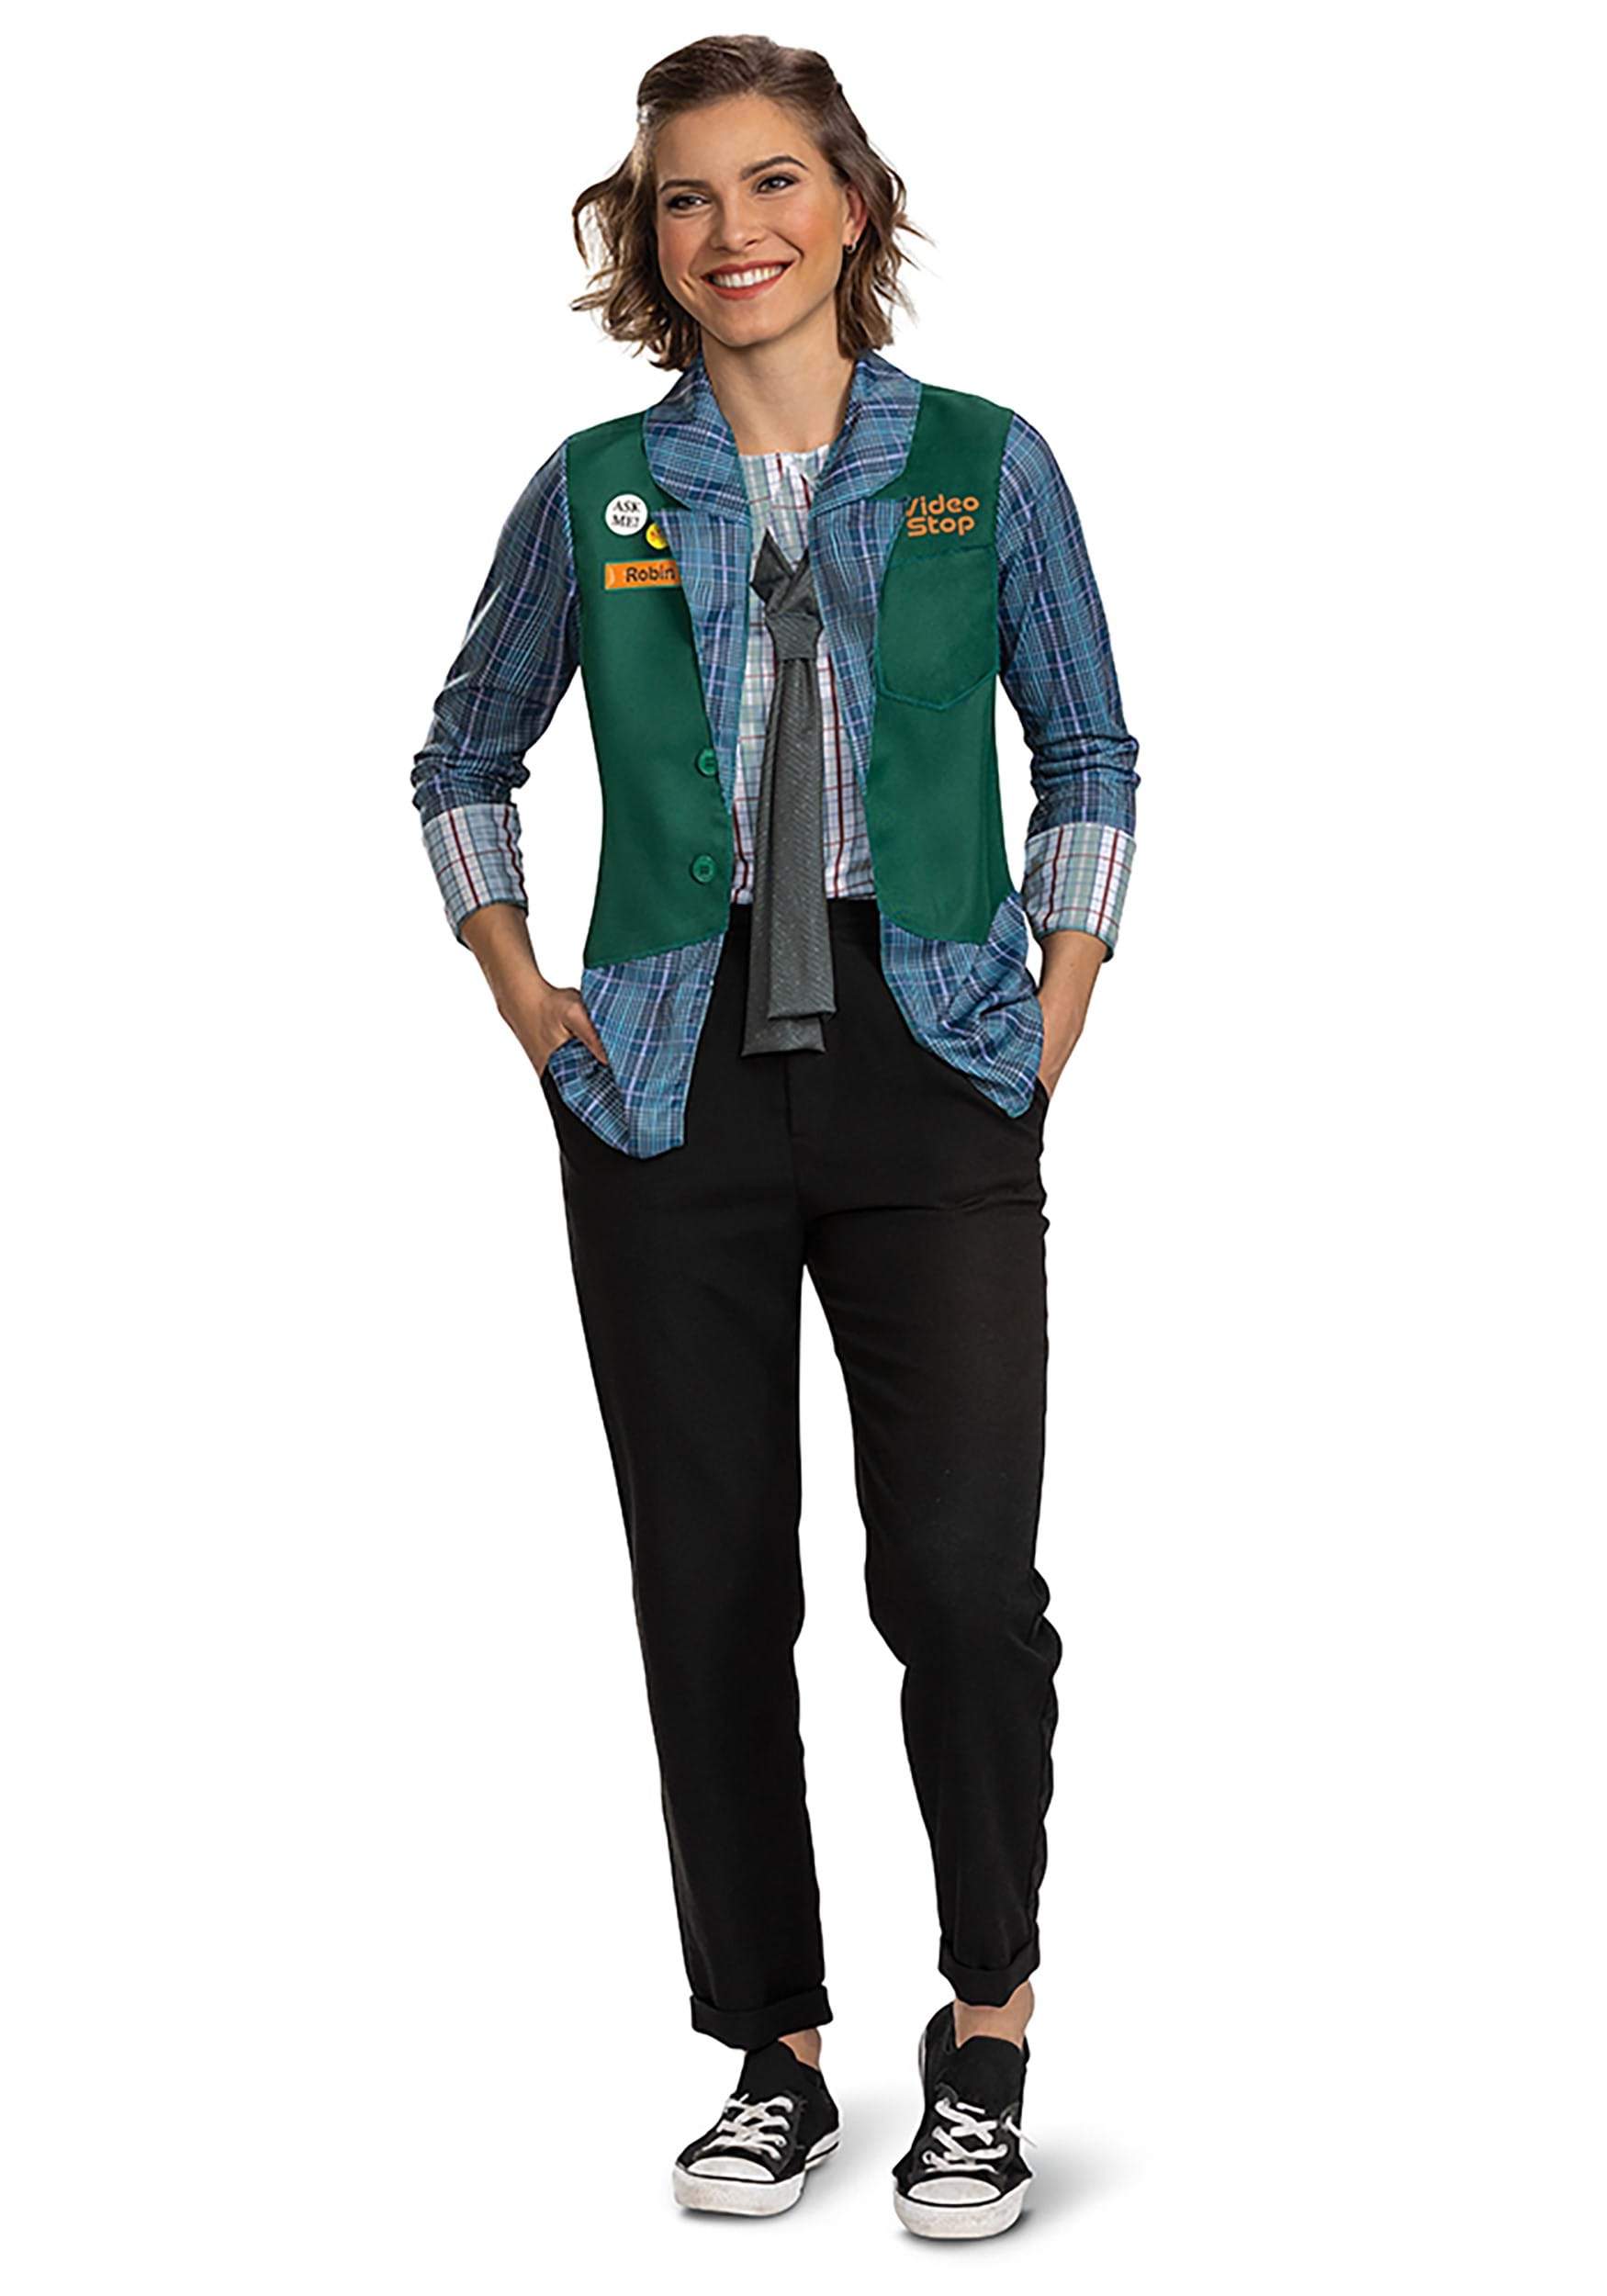 Stranger Things Deluxe Video Robin S4 Costume for Adults